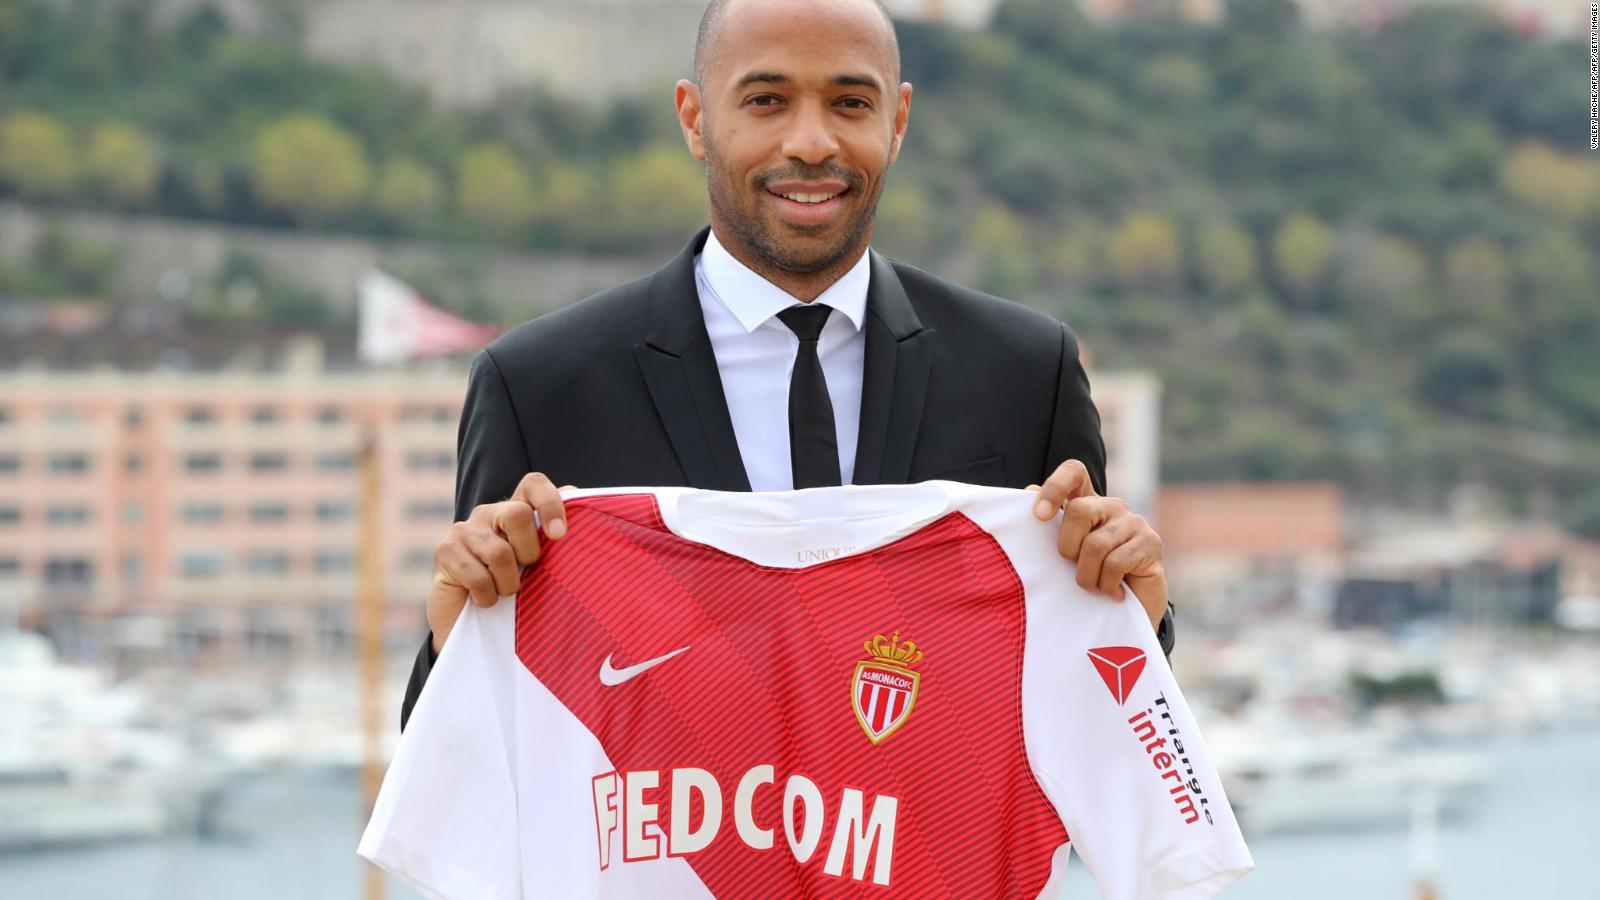 thierry henry monaco jersey